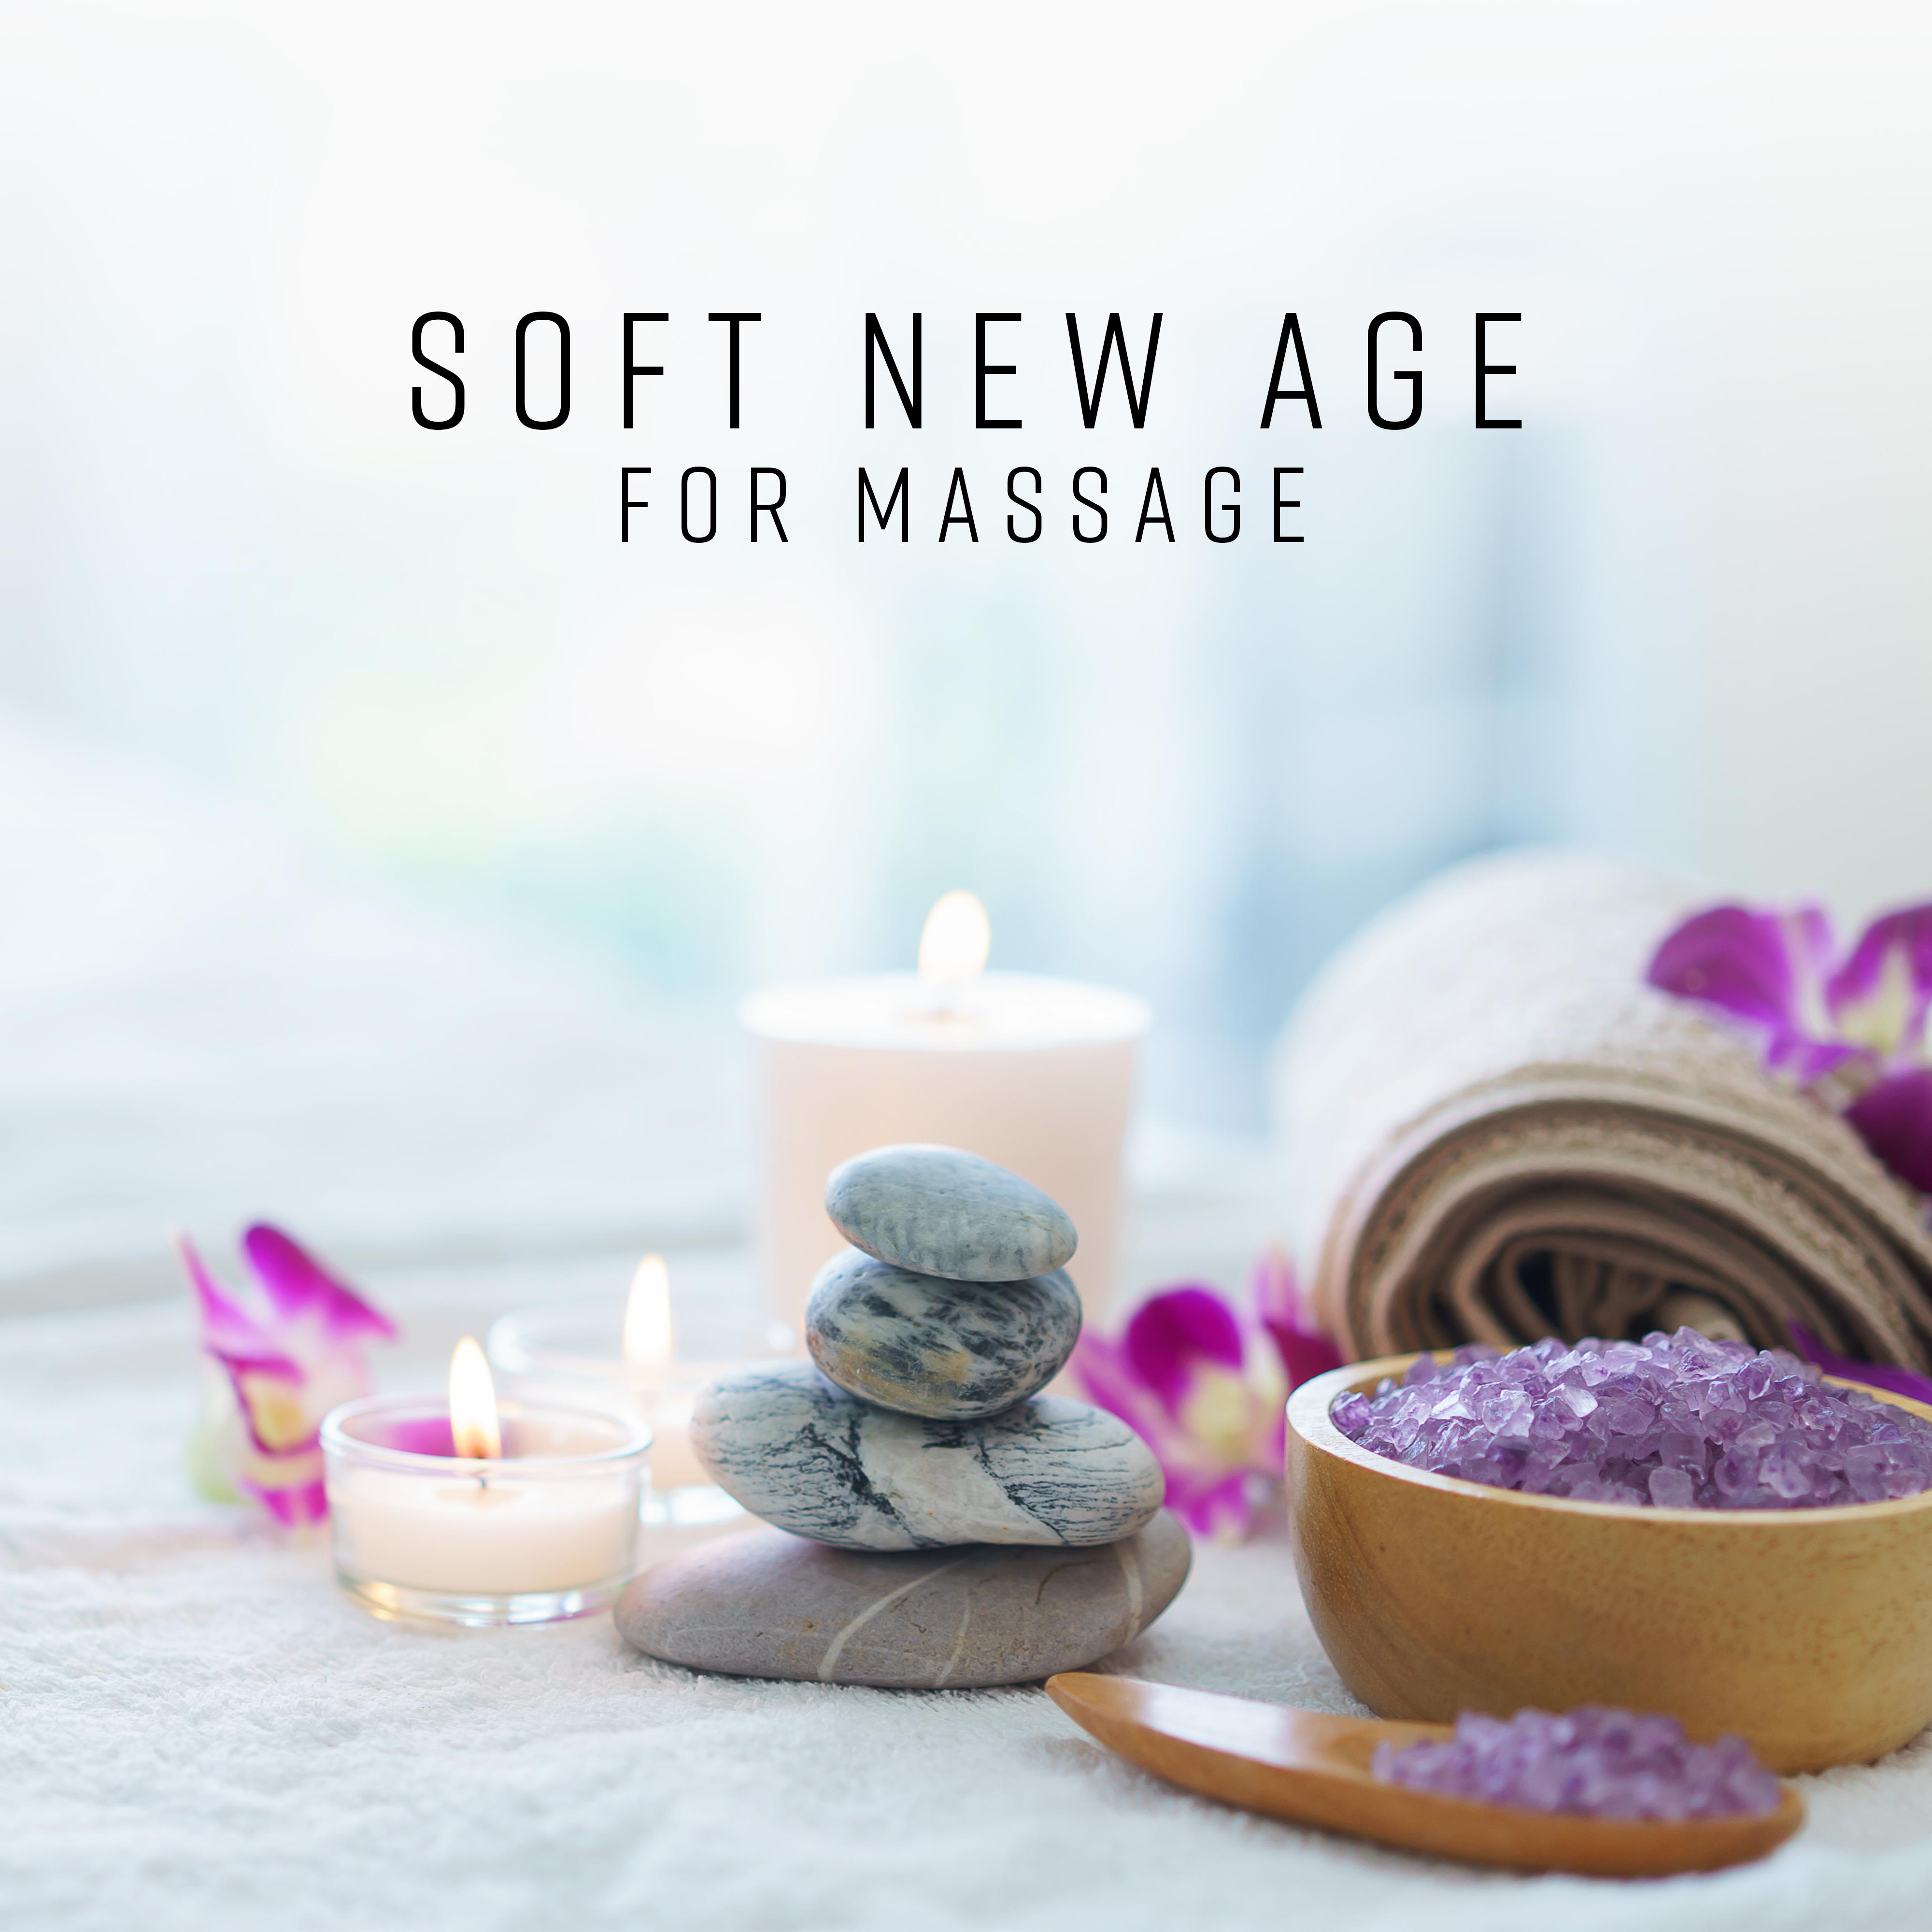 Soft New Age for Massage